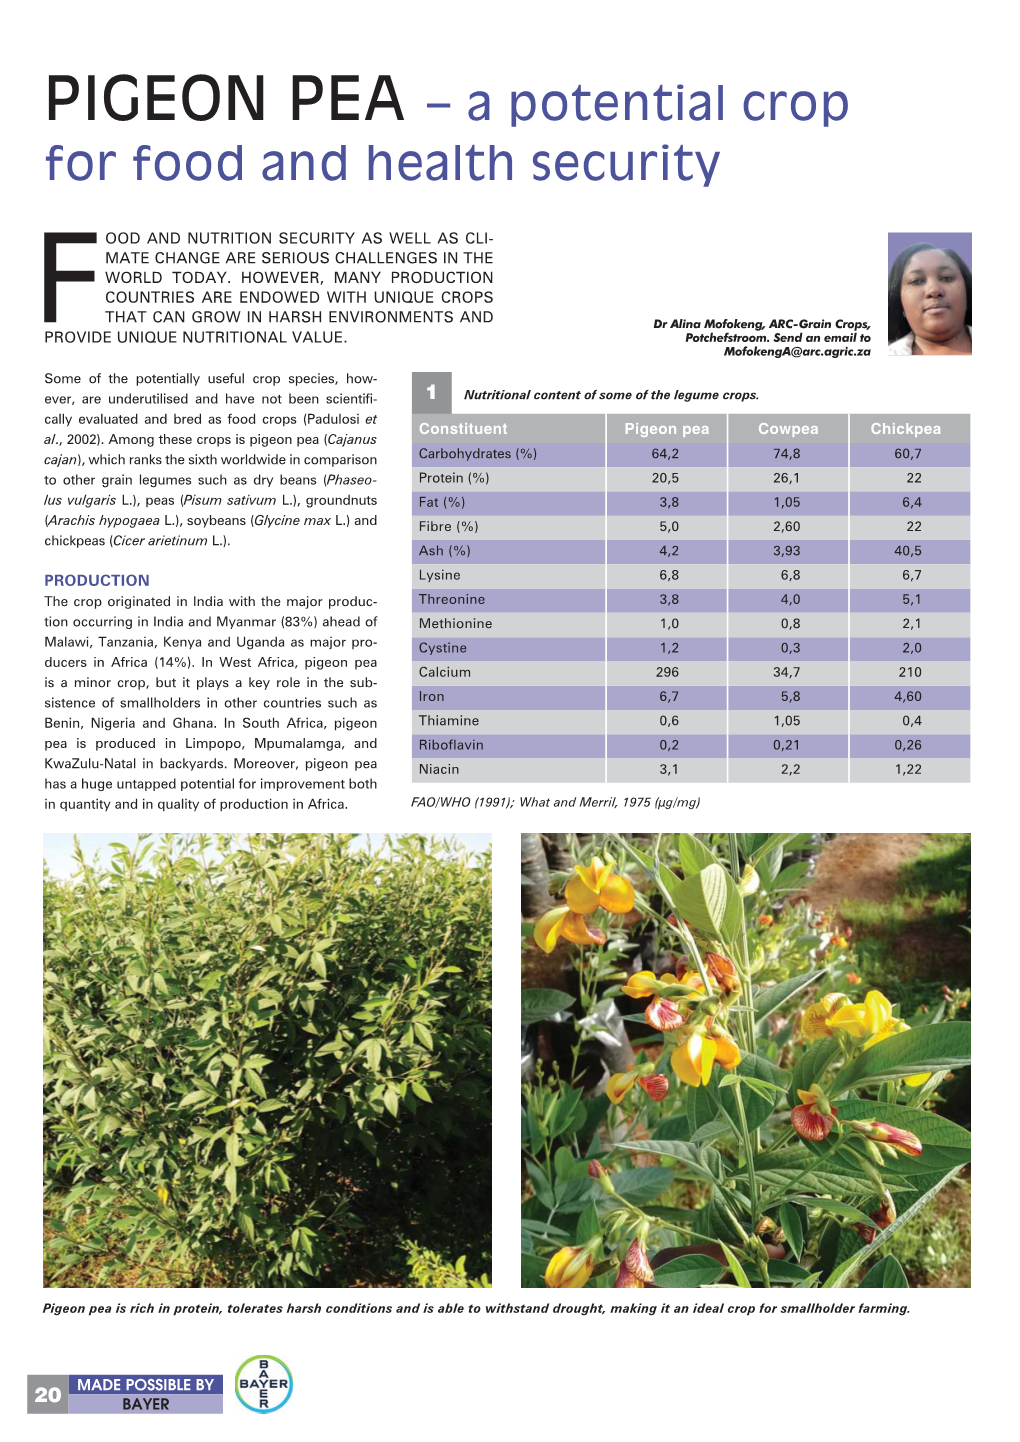 PIGEON PEA – a Potential Crop for Food and Health Security